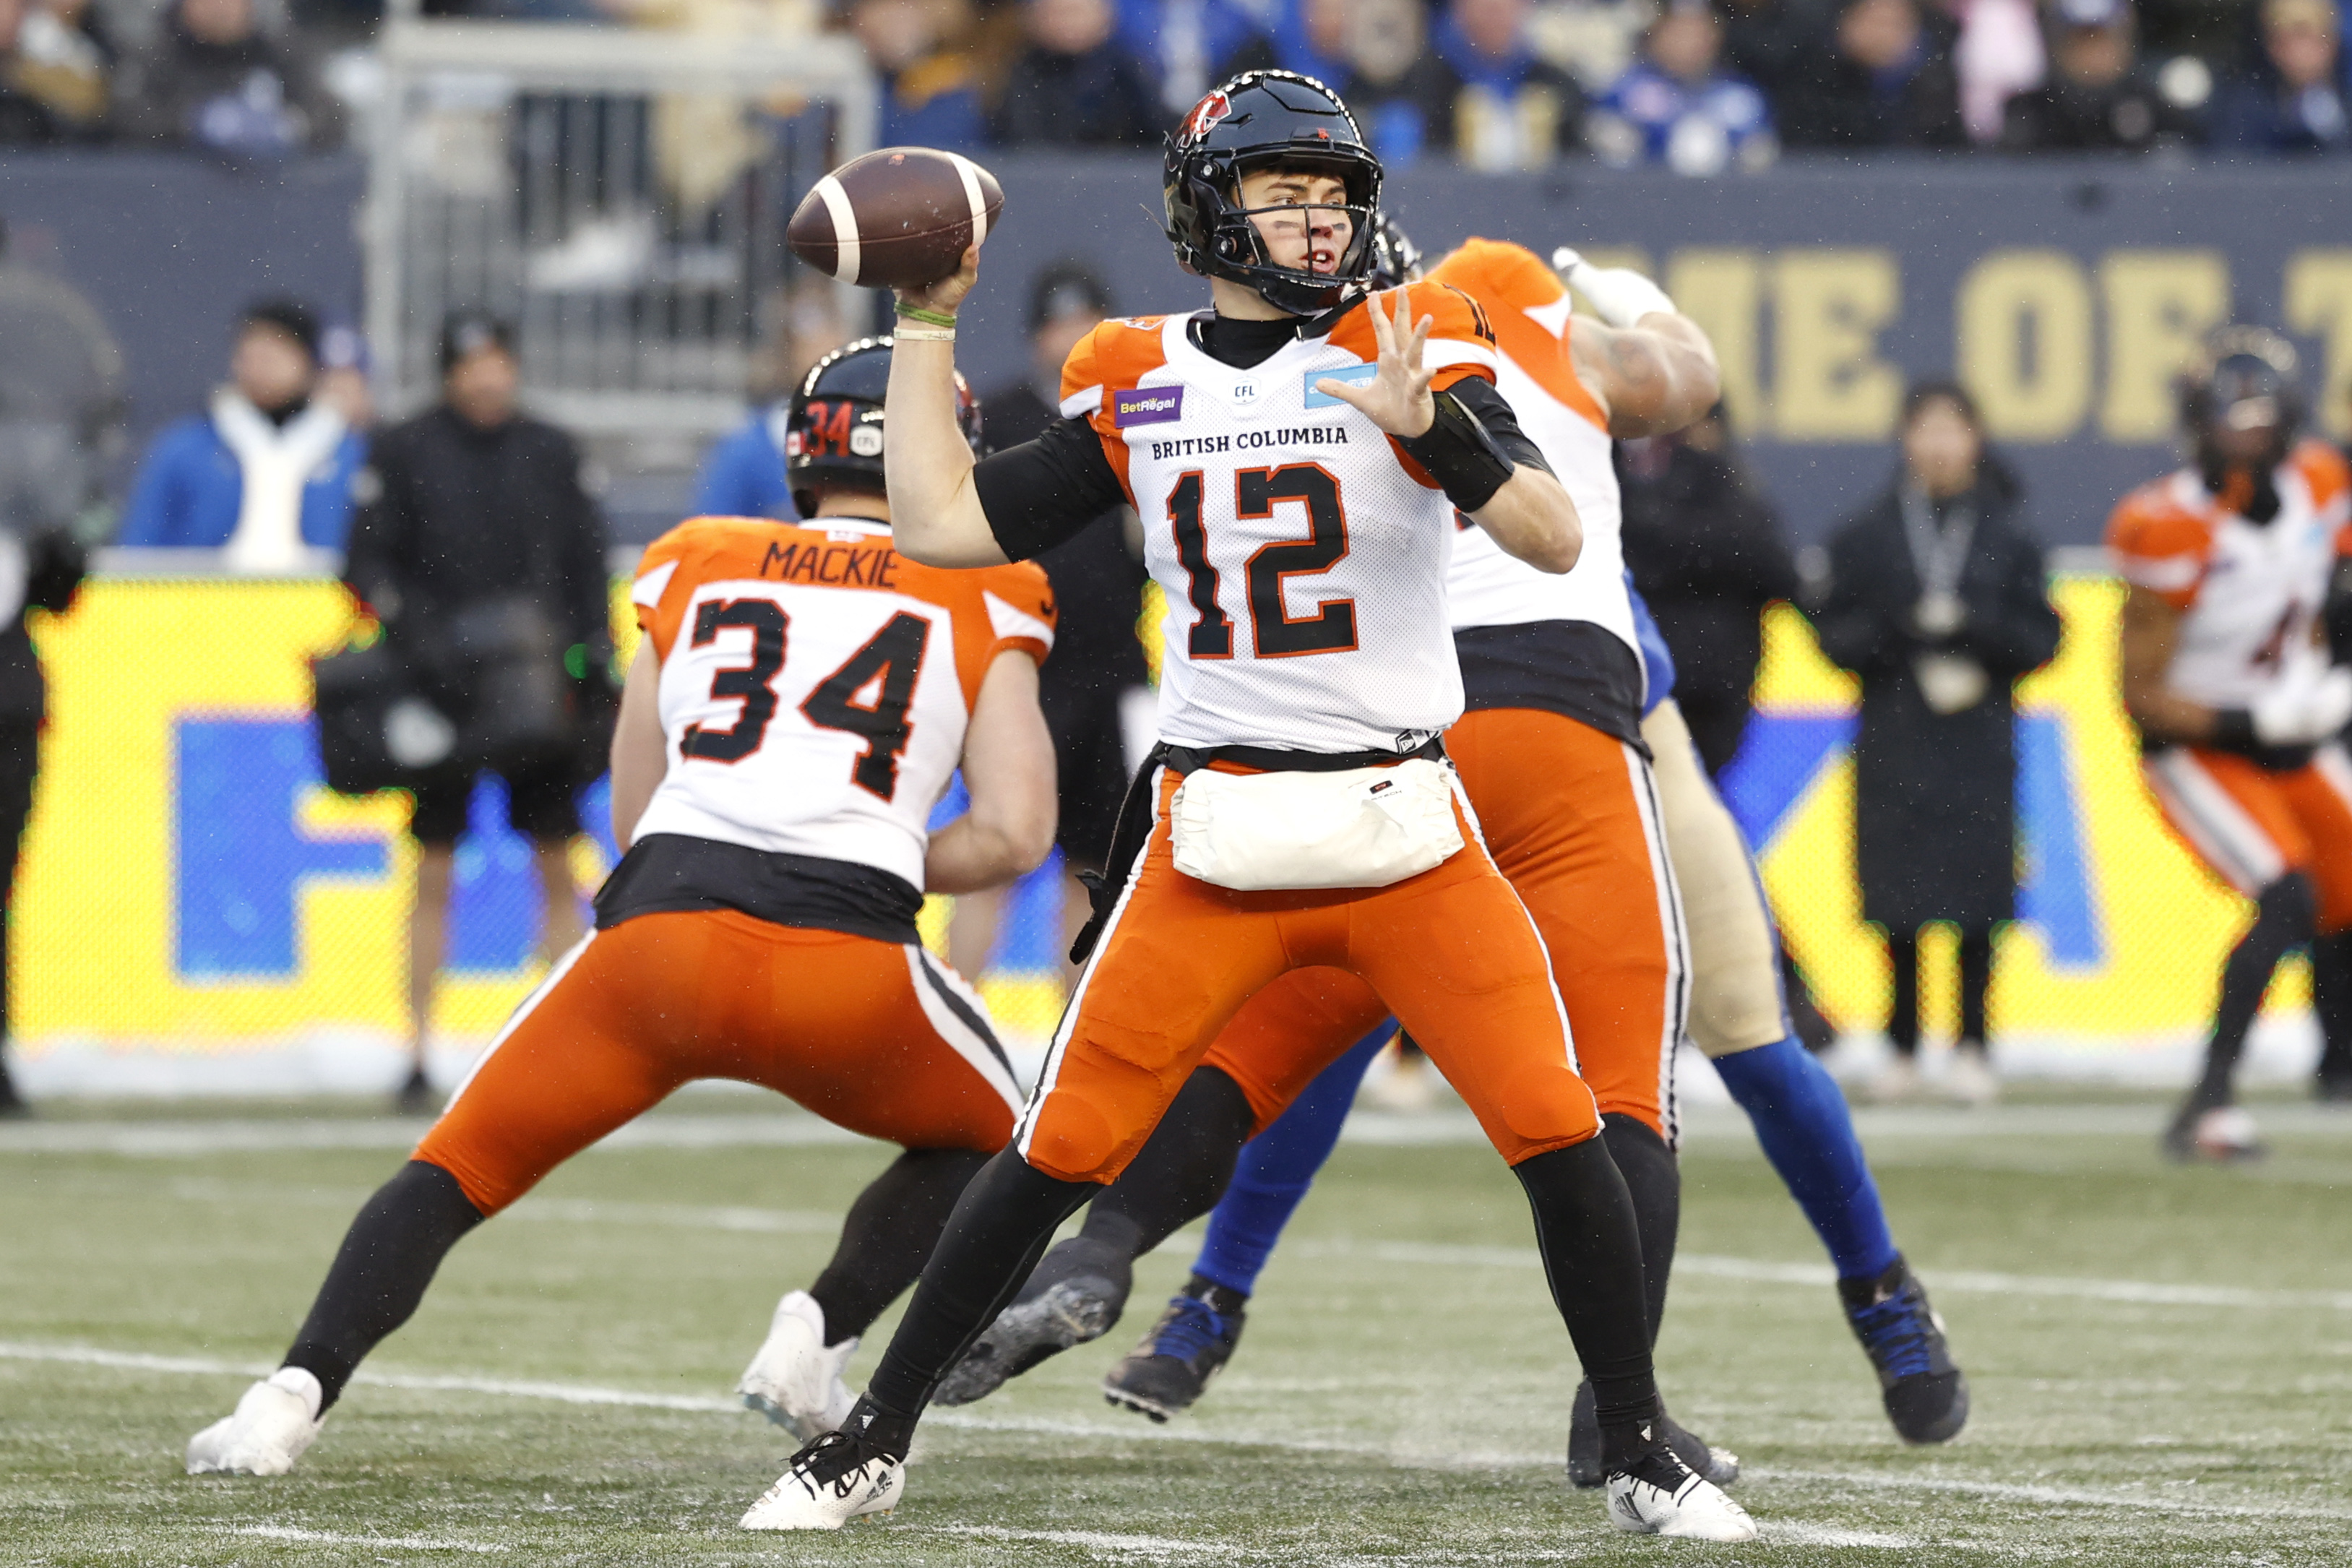 Nov 13, 2022; Winnigeg, Manitoba, CAN; BC Lions quarterback Nathan Rourke (12) gets set to make a pass against the Winnipeg Blue Bombers at Investors Group Field. Mandatory Credit: James Carey Lauder-USA TODAY Sports